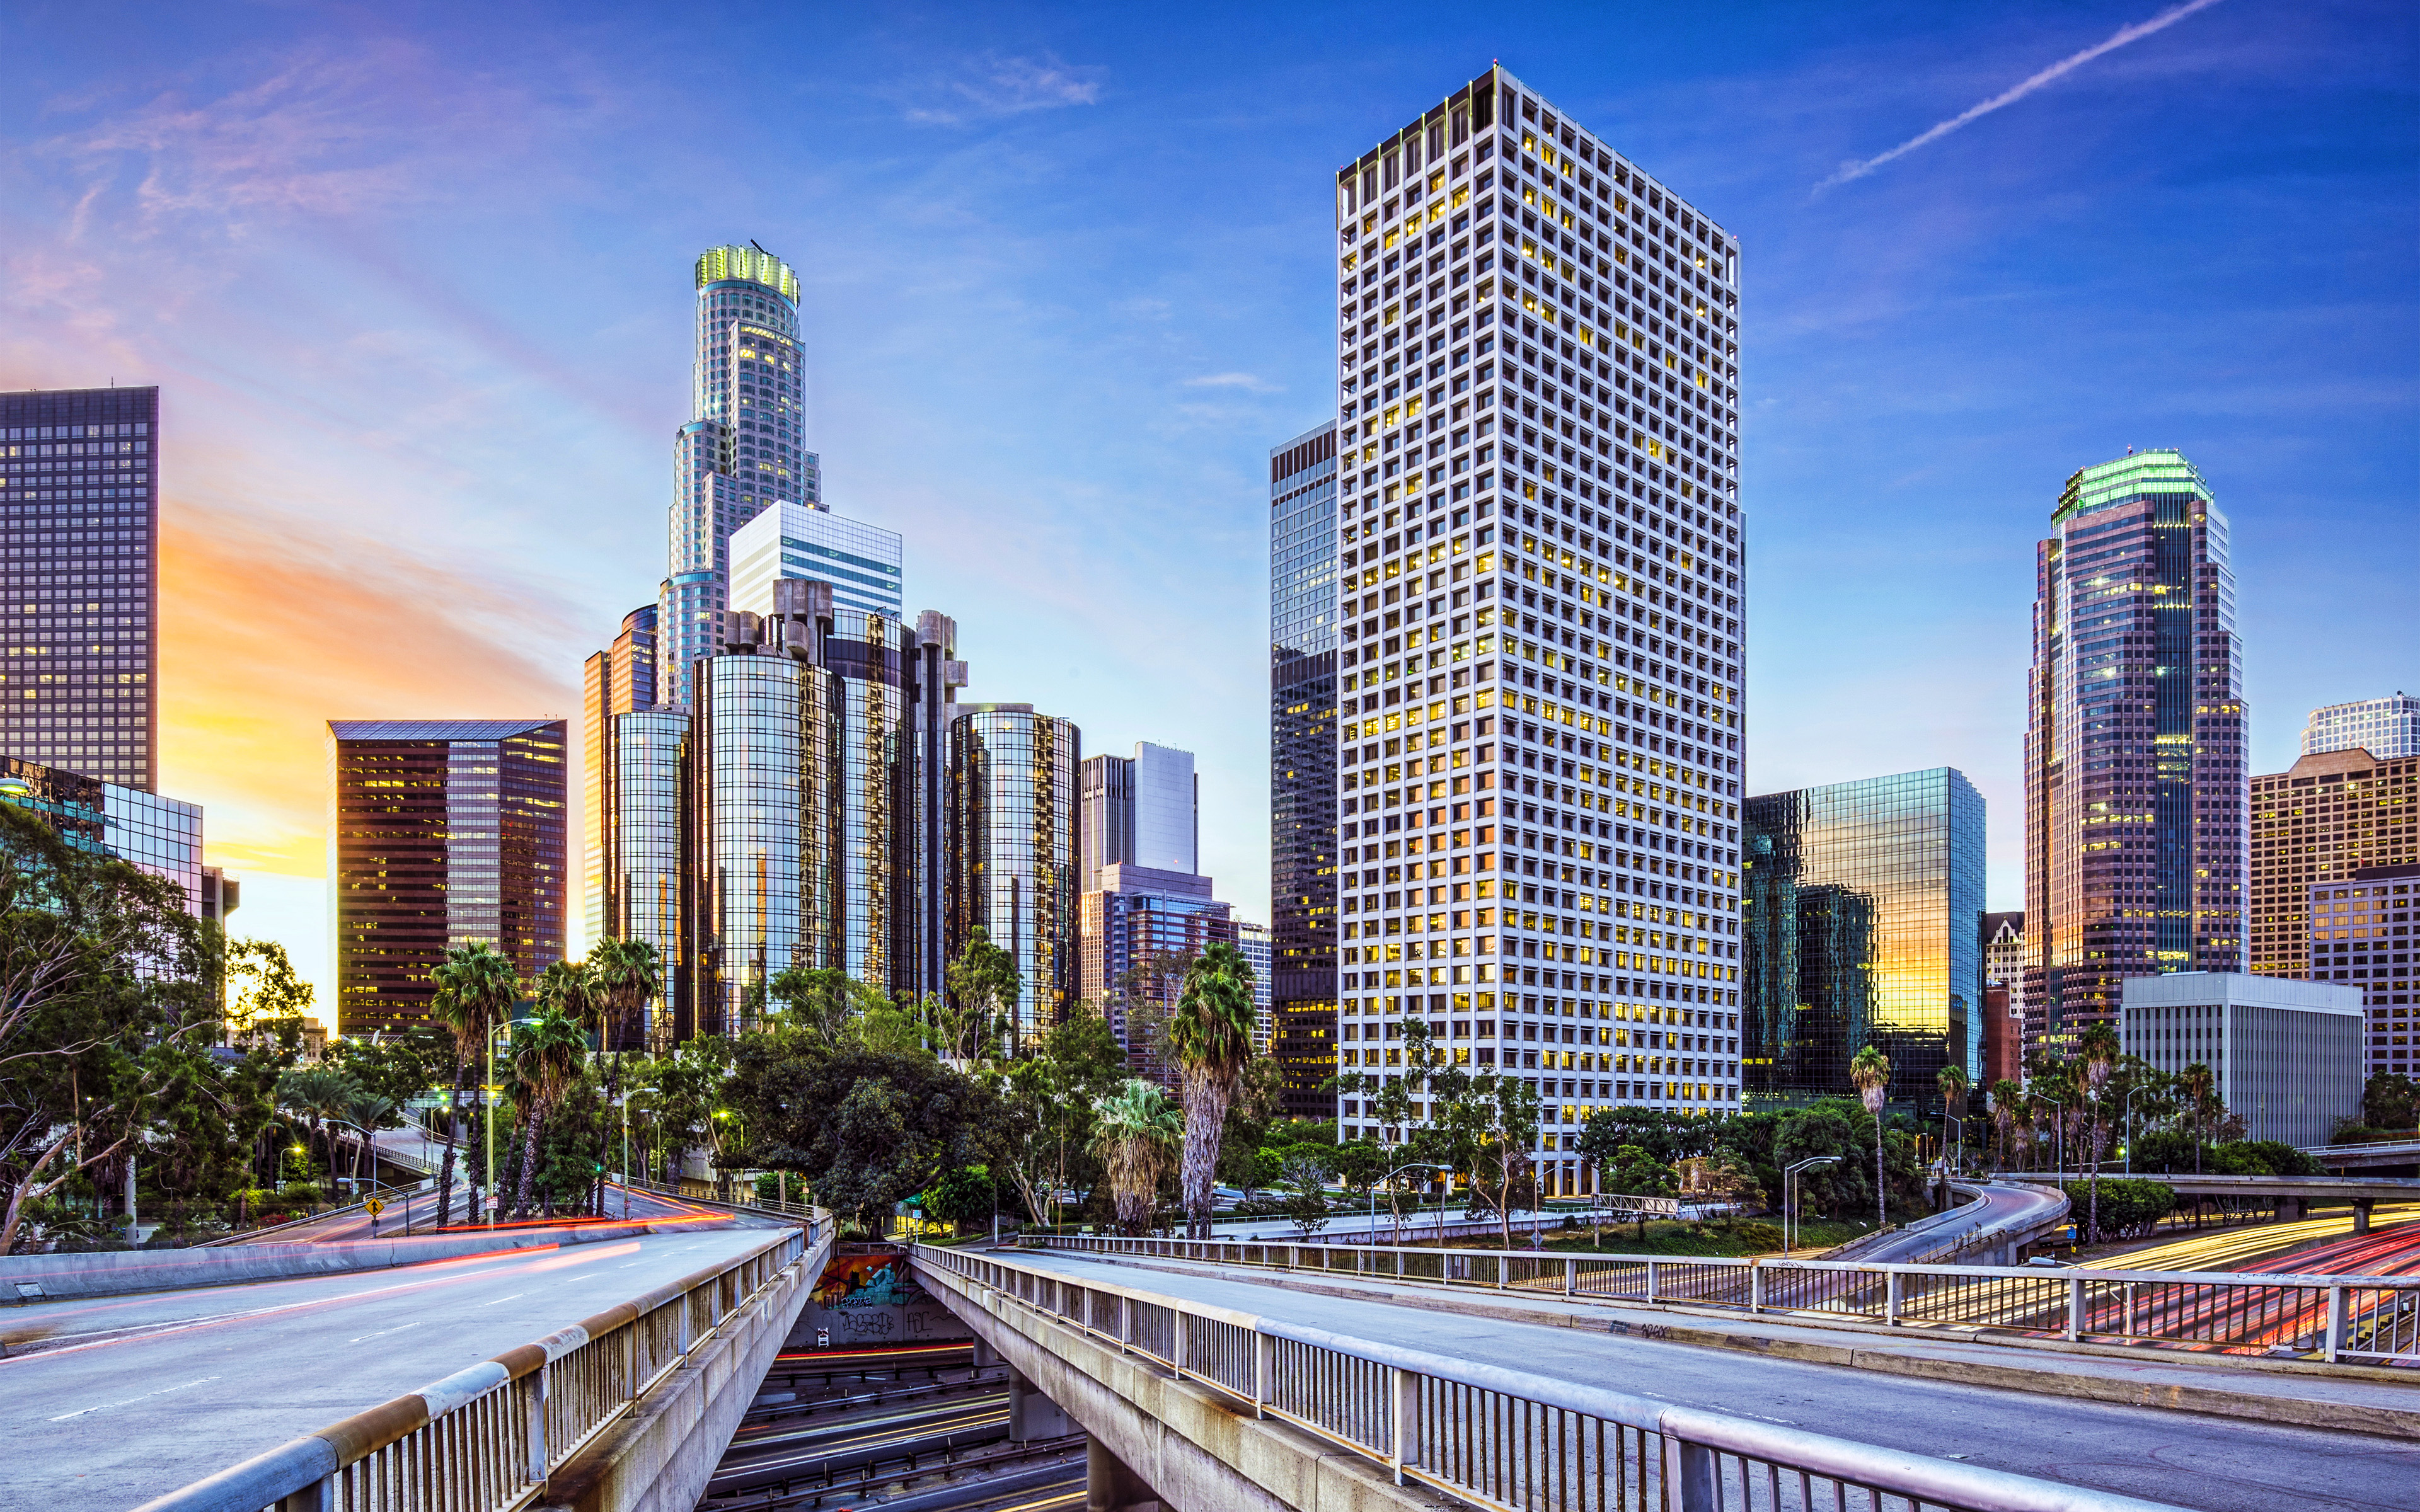 Download wallpaper Los Angeles, 4k, modern buildings, american cities, California, America, Los Angeles at evening, USA, City of Los Angeles, Cities of California for desktop with resolution 3840x2400. High Quality HD picture